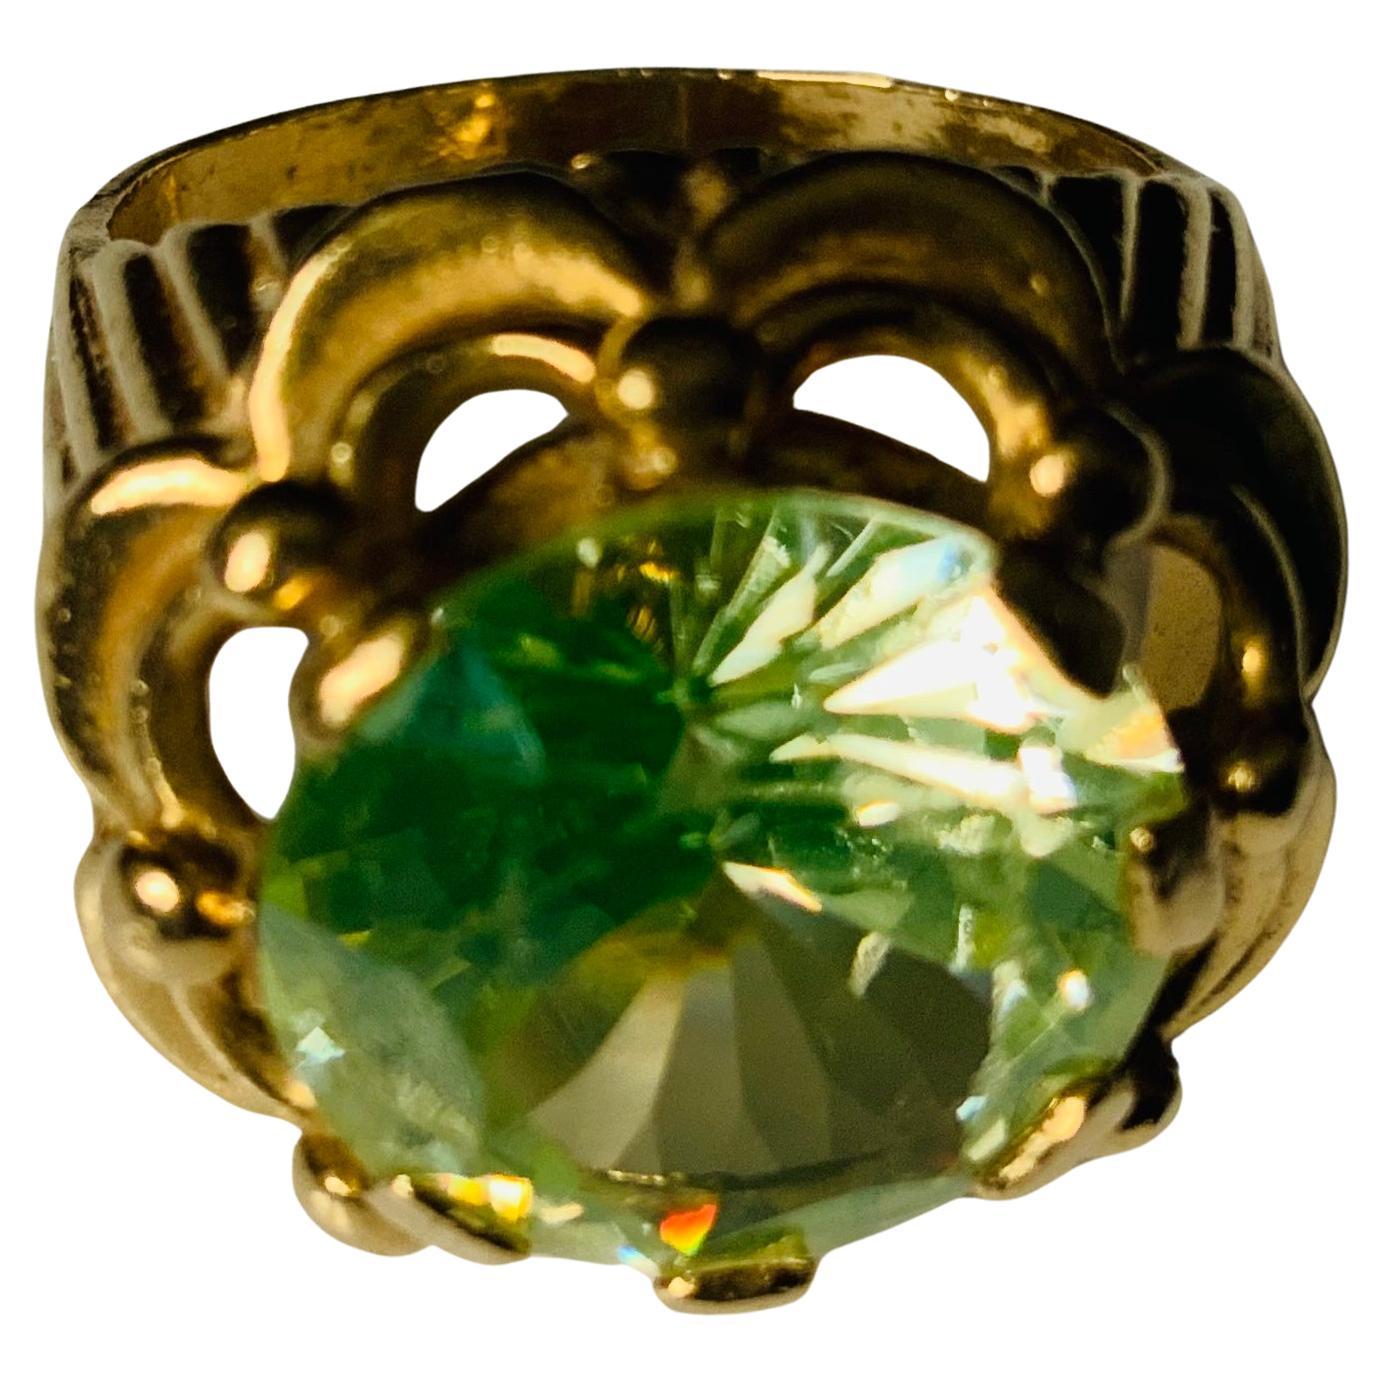 This a 14K yellow gold ring. It depicts a Brilliant Shape Zircon Beta type (12.11 x 7.17 mm ) weighing 8.15 carats  and mounted on seven gold prongs setting. Below the prong setting, the light green Zircon is adorned with a two levels swags enhanced